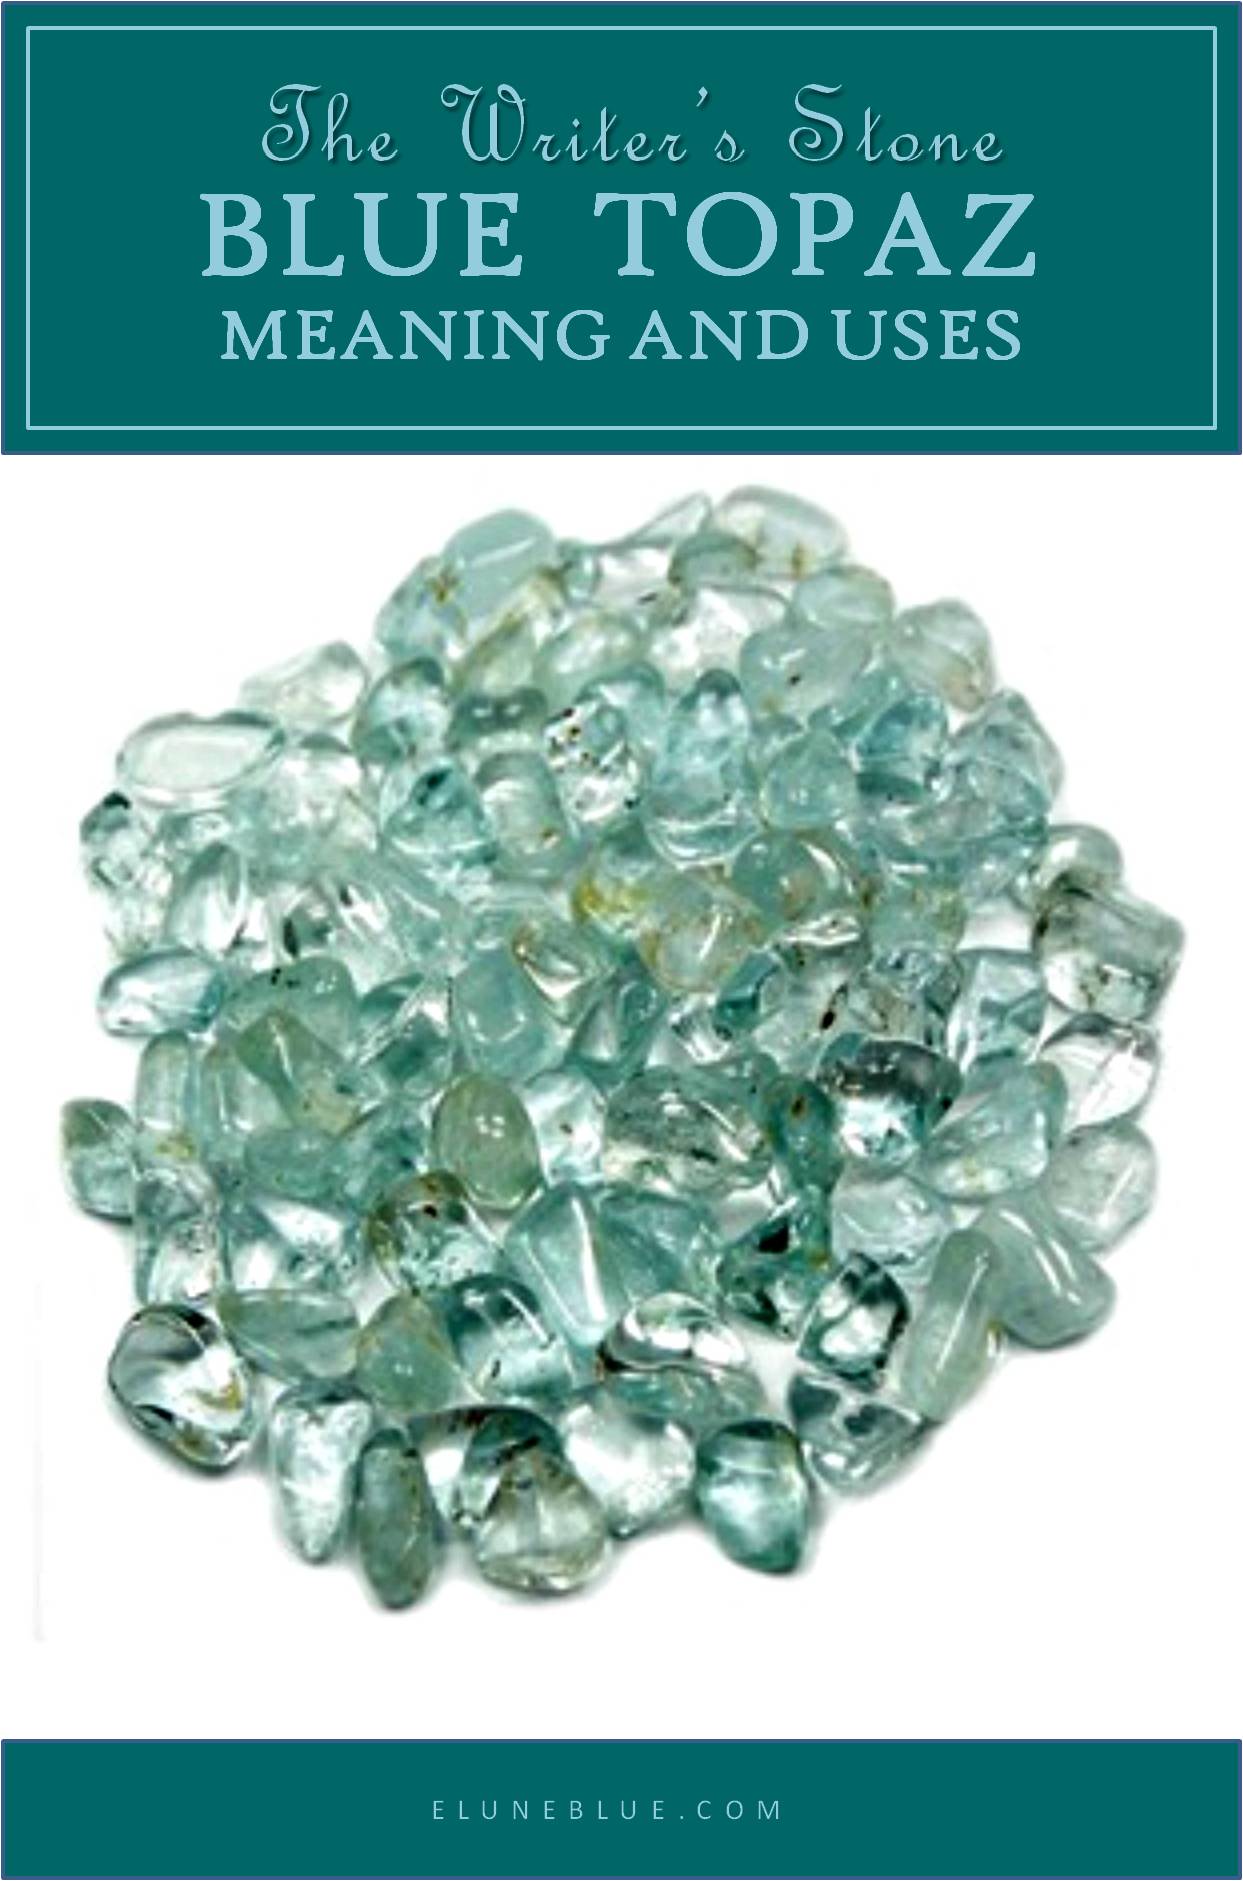 An image of tumbled blue topaz with a title that says: "The Writer's Stone" Blue Topaz Meaning and Uses